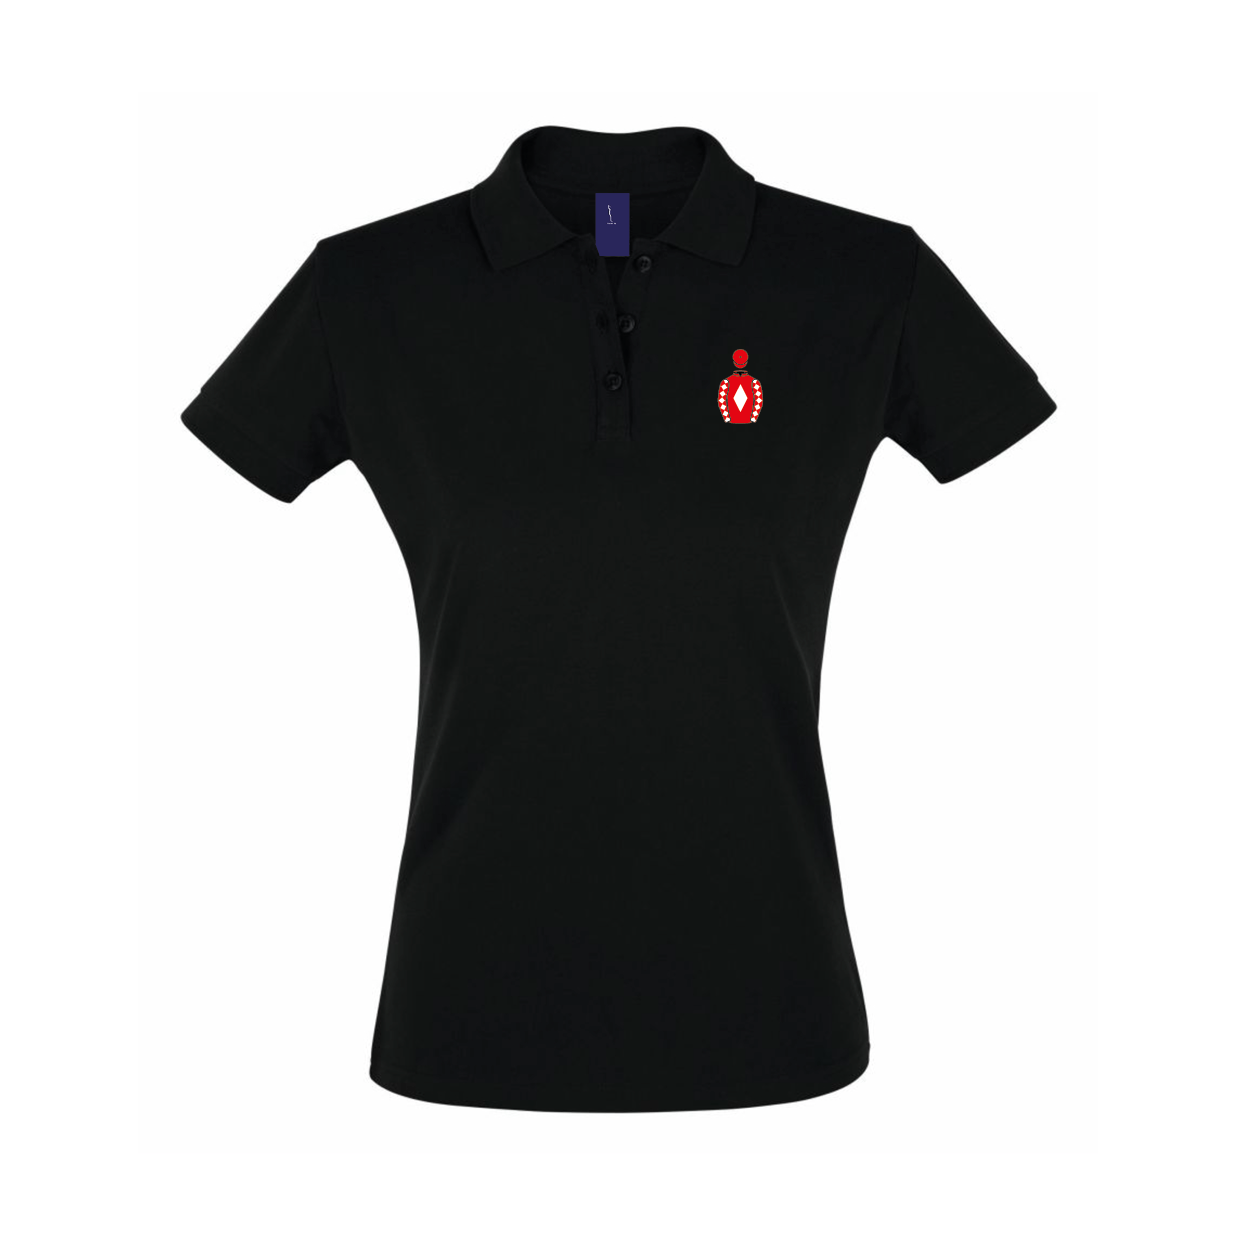 Ladies Caldwell Construction Ltd Embroidered Polo Shirt - Clothing - Hacked Up